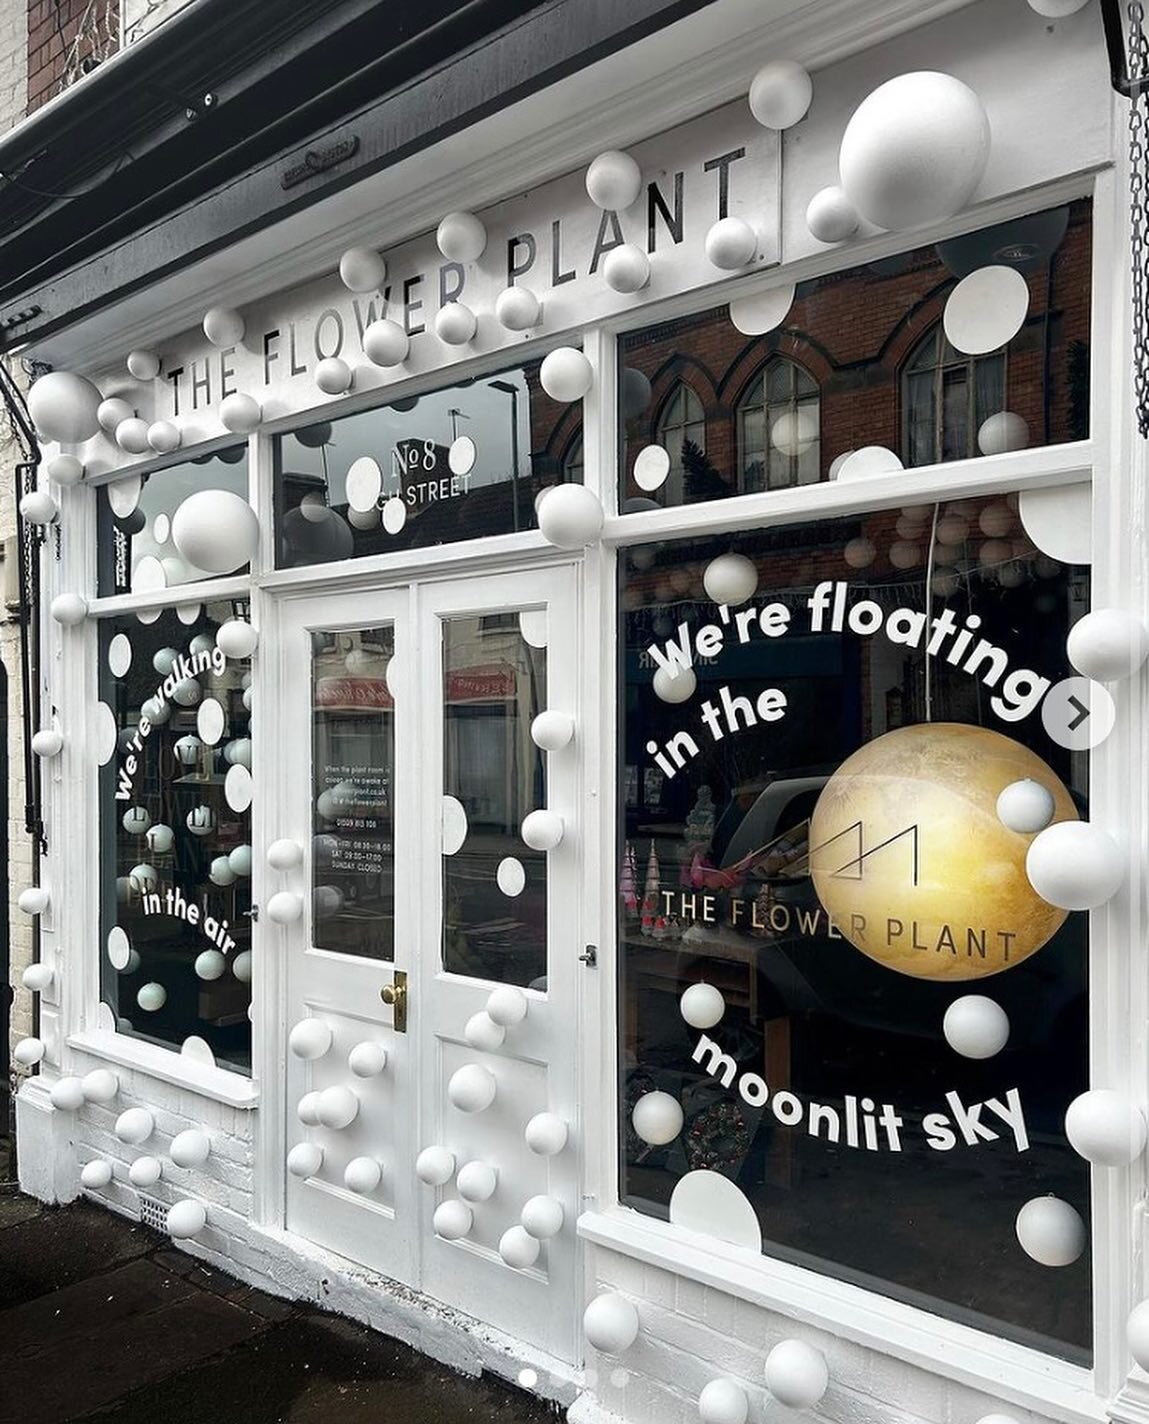 It was an absolute pleasure to be part of another great window display for the stars @theflowerplant 

They always have such amazing ideas and manage to pull it off every time. 

This one in particular is close to me as it&rsquo;s a tradition that th